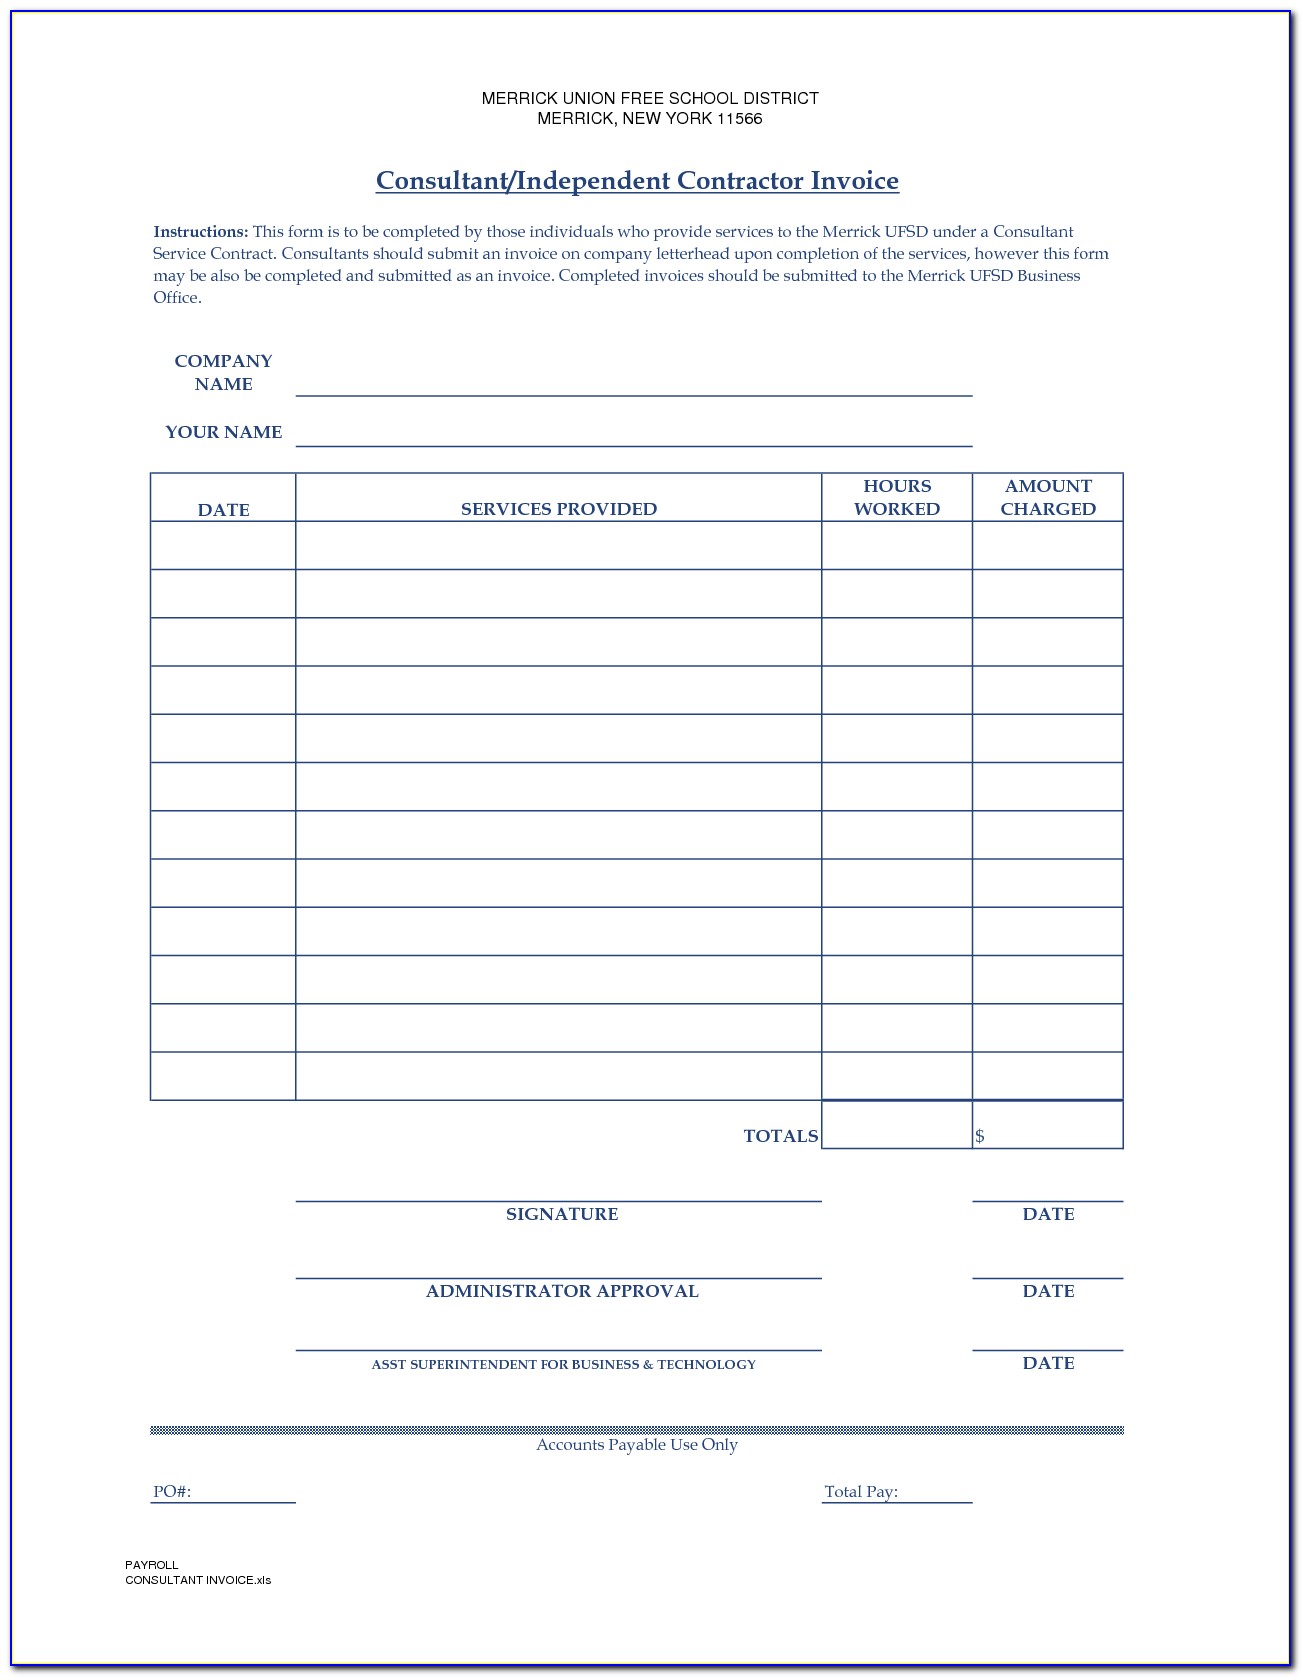 Independent Contractor Invoice Form